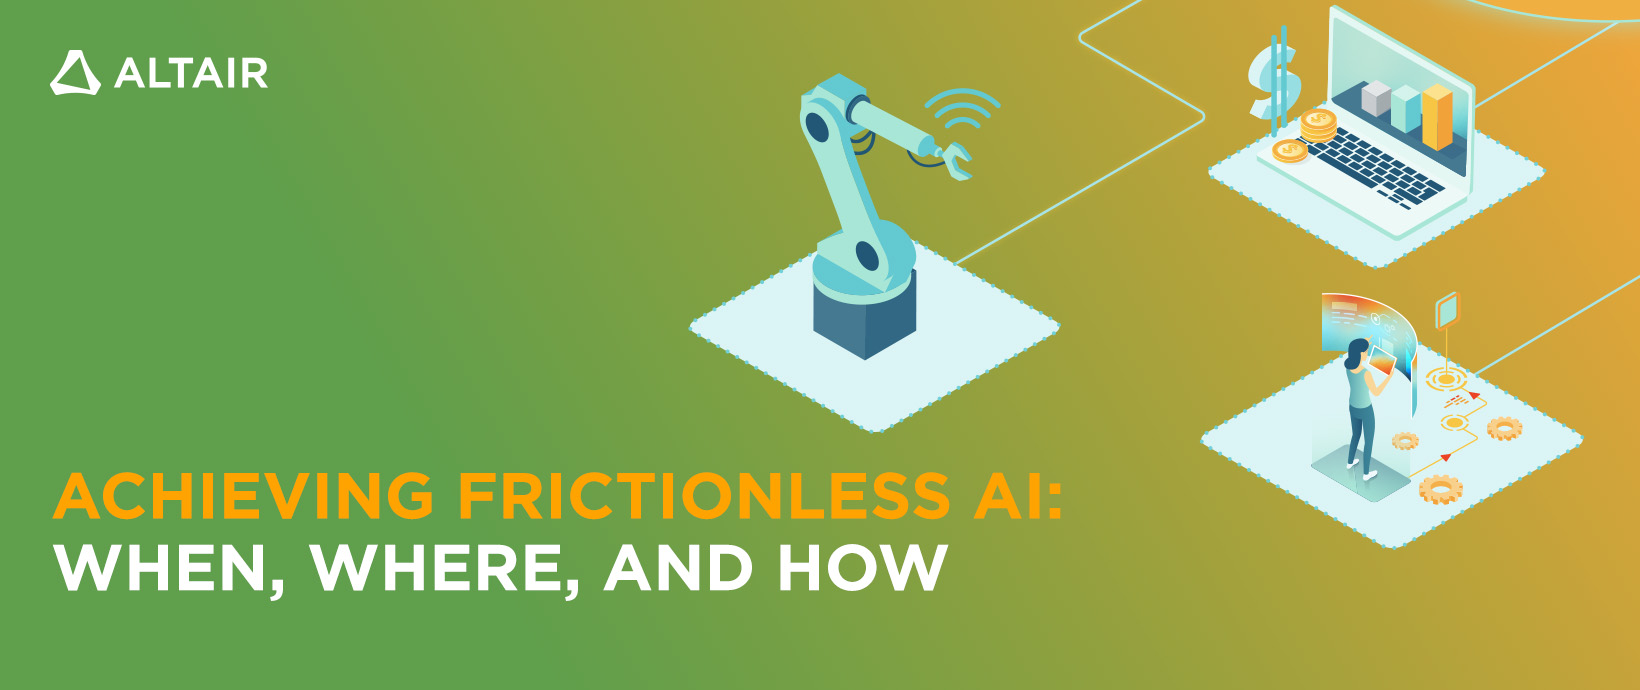 Achieving Frictionless AI: When, Where, and How